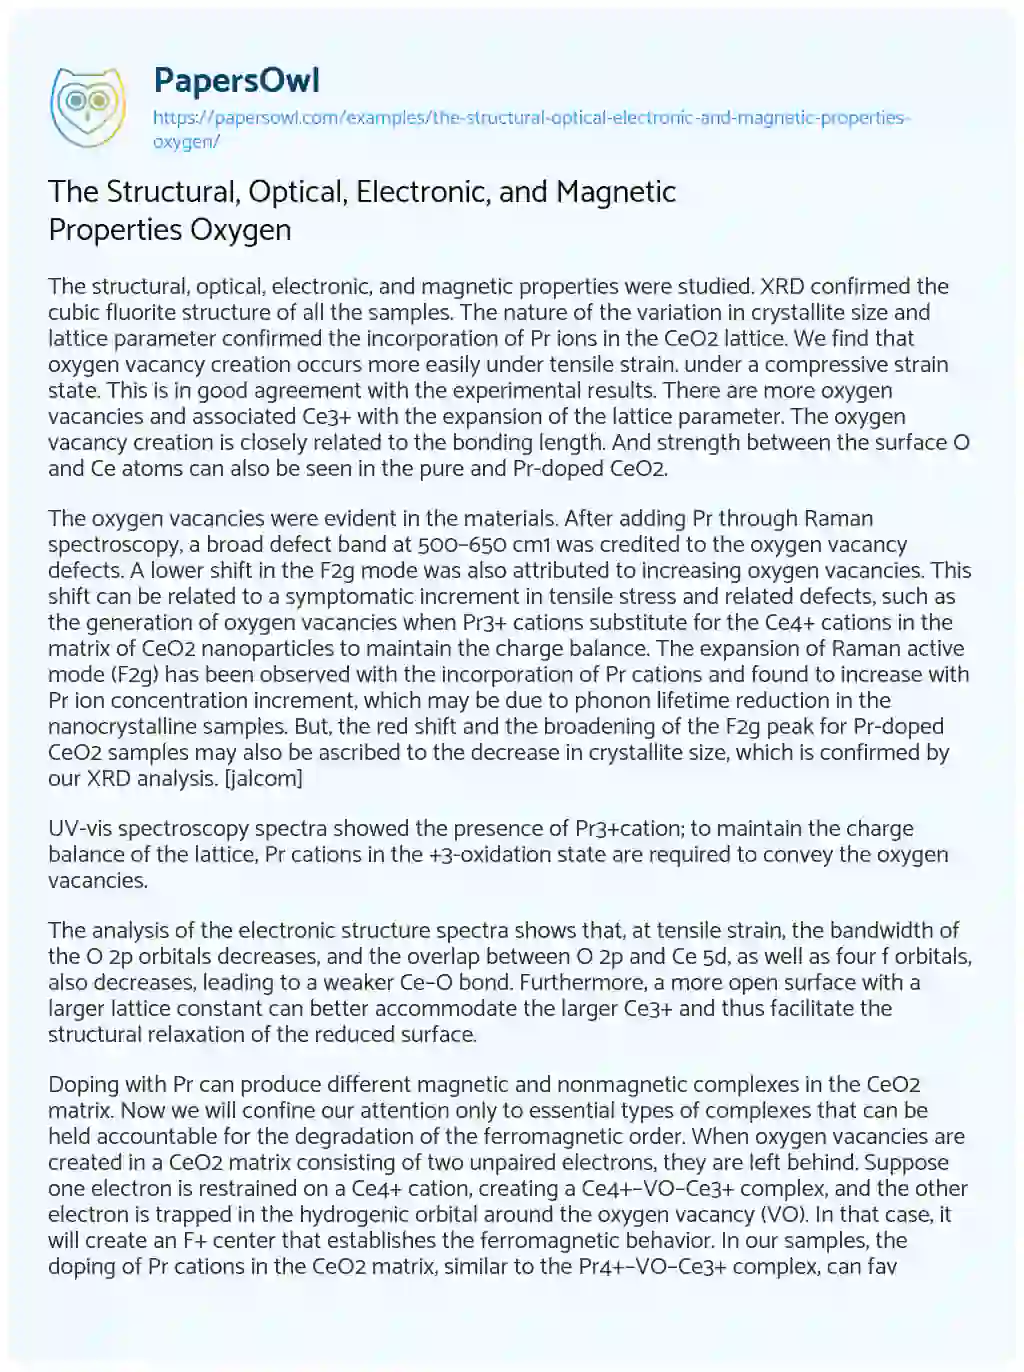 Essay on The Structural, Optical, Electronic, and Magnetic Properties Oxygen